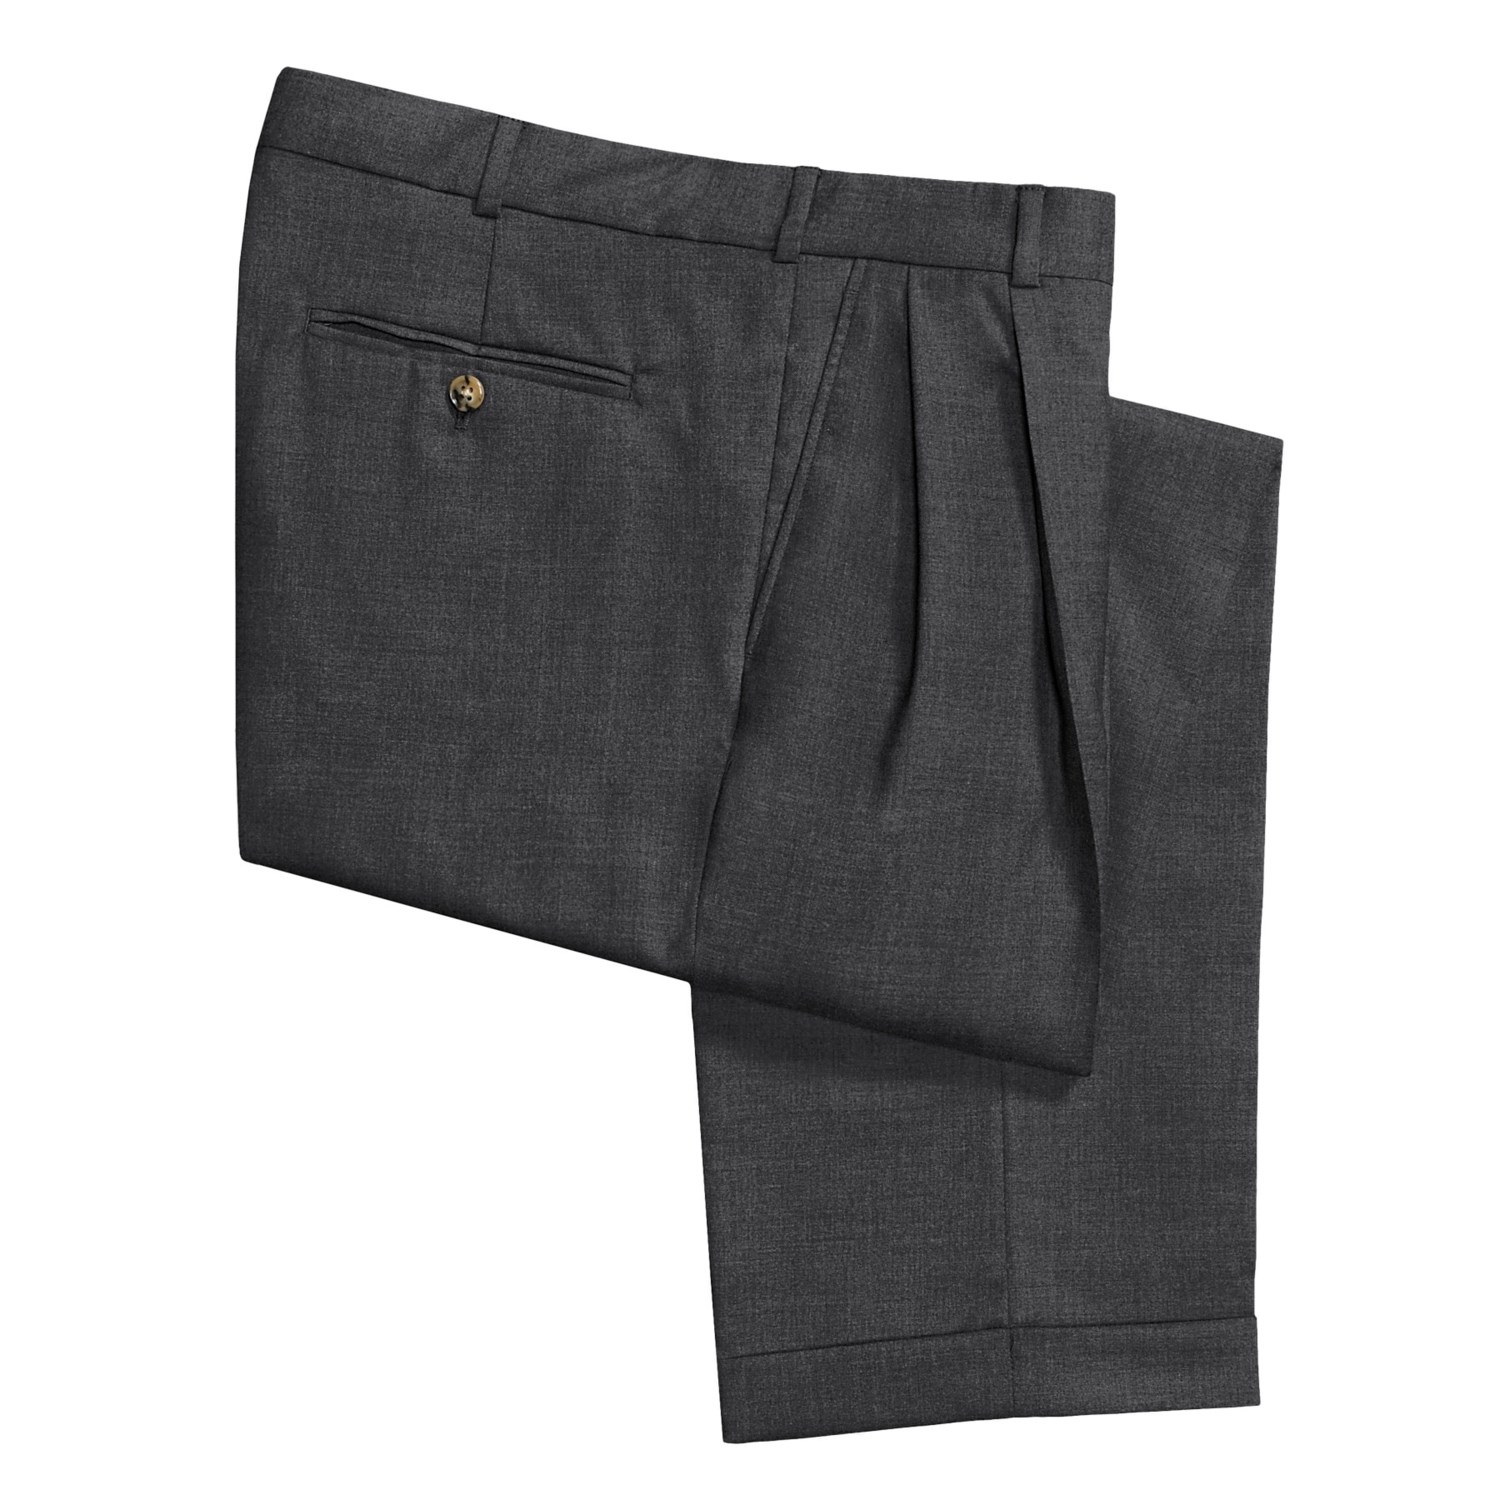 Wool Twill Double-Reverse Pants - Pleated Front (For Men) - Save 61%